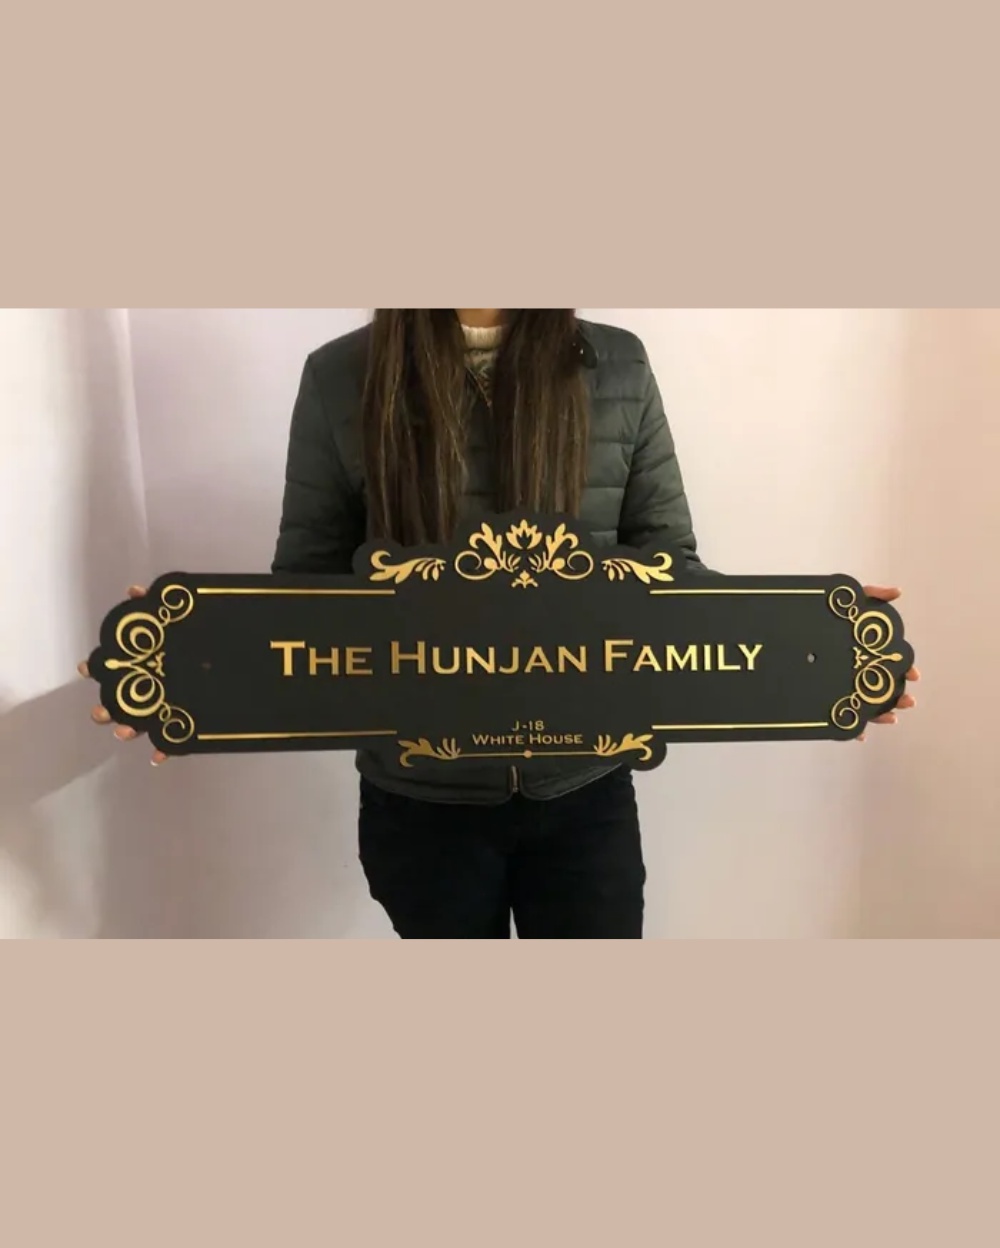 Personalize and Glam Up Your Room with These Designer Name Plates